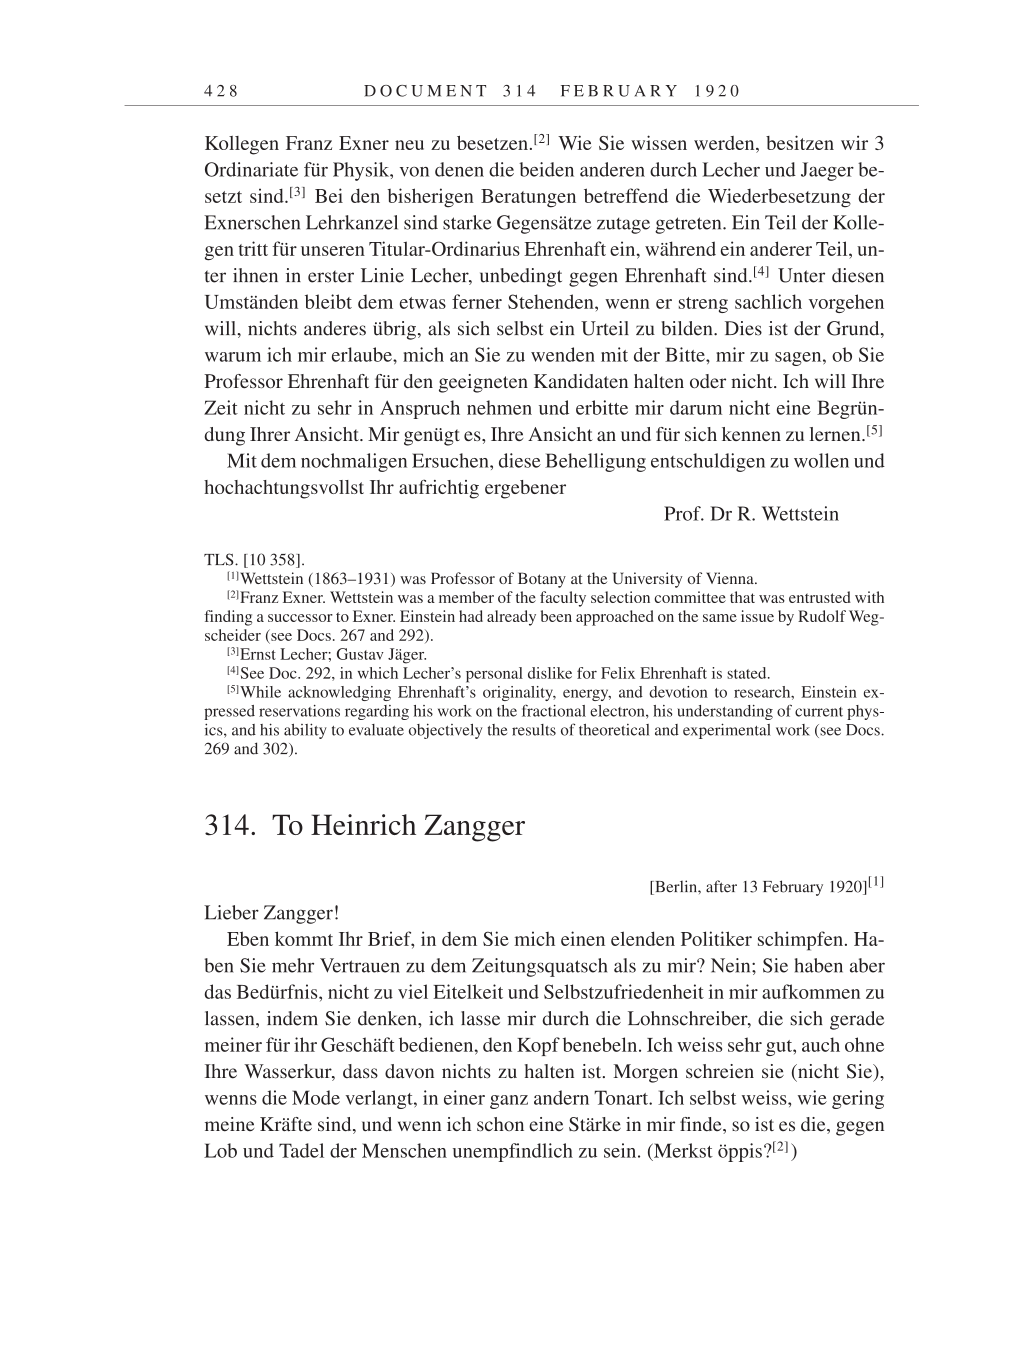 Volume 9: The Berlin Years: Correspondence January 1919-April 1920 page 428